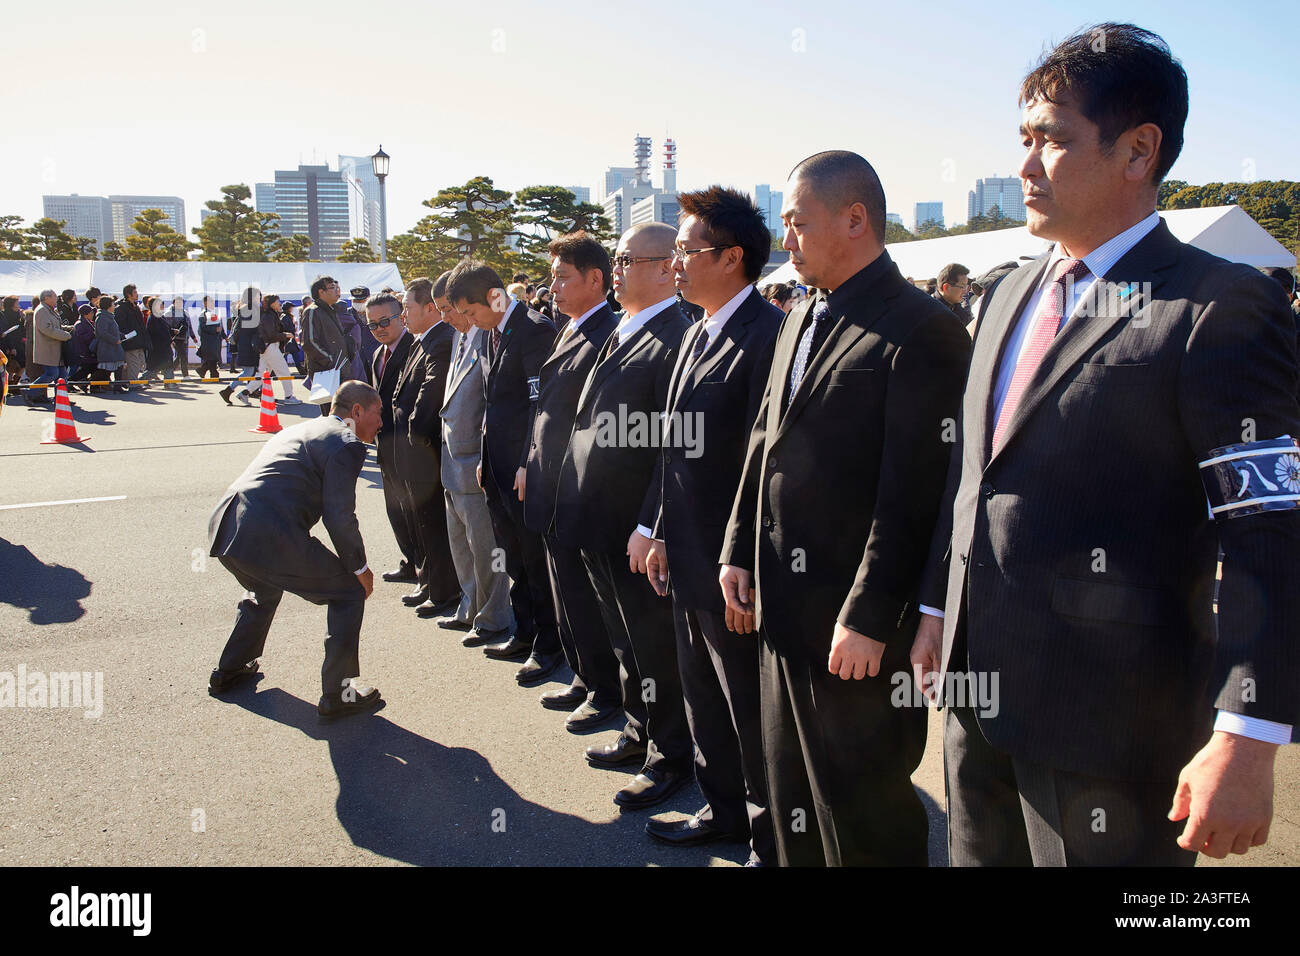 Japan Tokyo Military stands still and inspected before they go to the Emperor palace where emperor Akihito lives with his family step down on 30 april Stock Photo